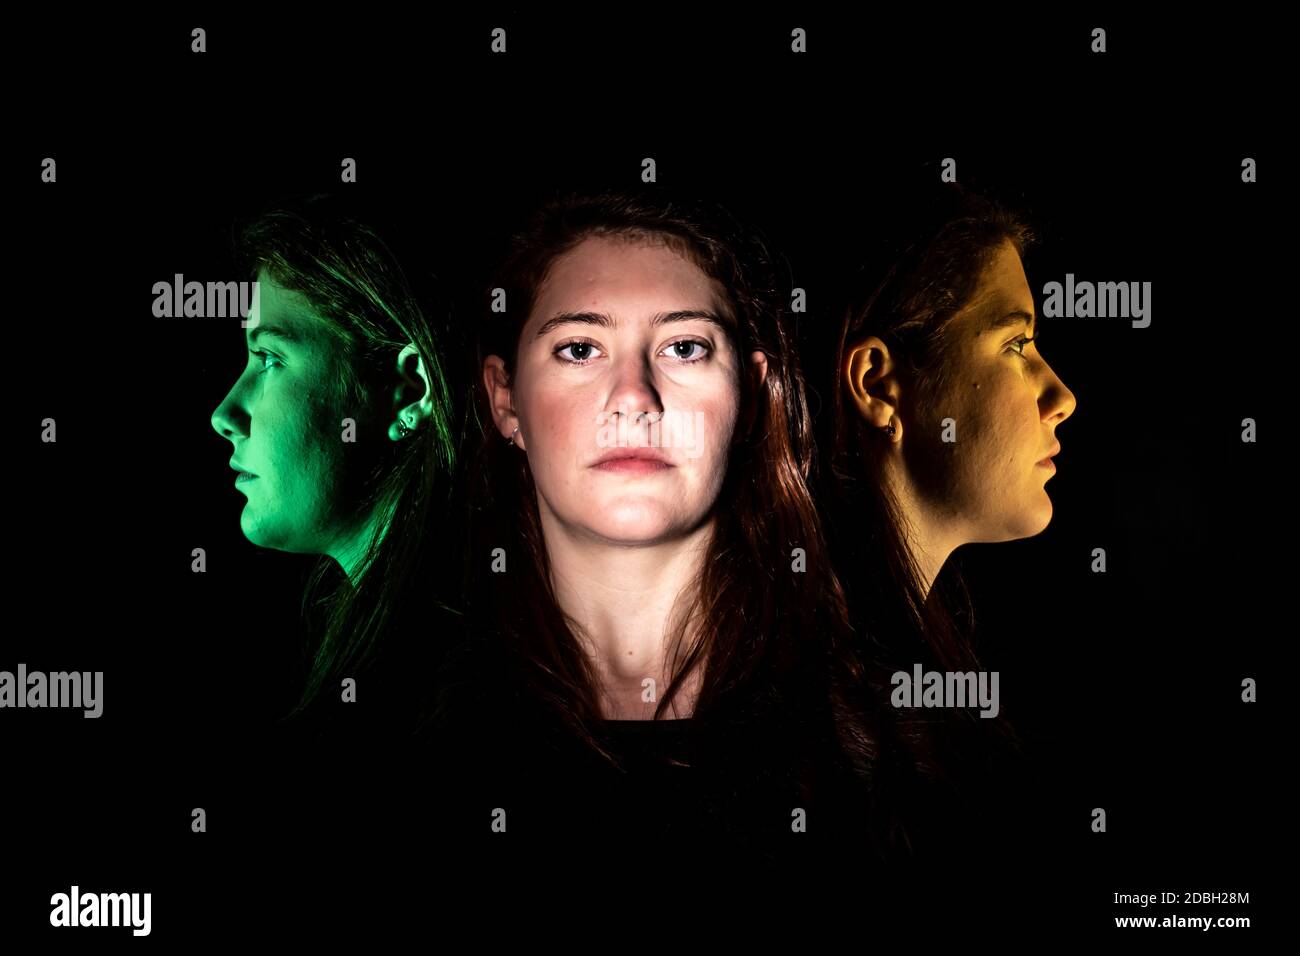 Face of a young woman frontal and multicolored in profile against a black background Stock Photo